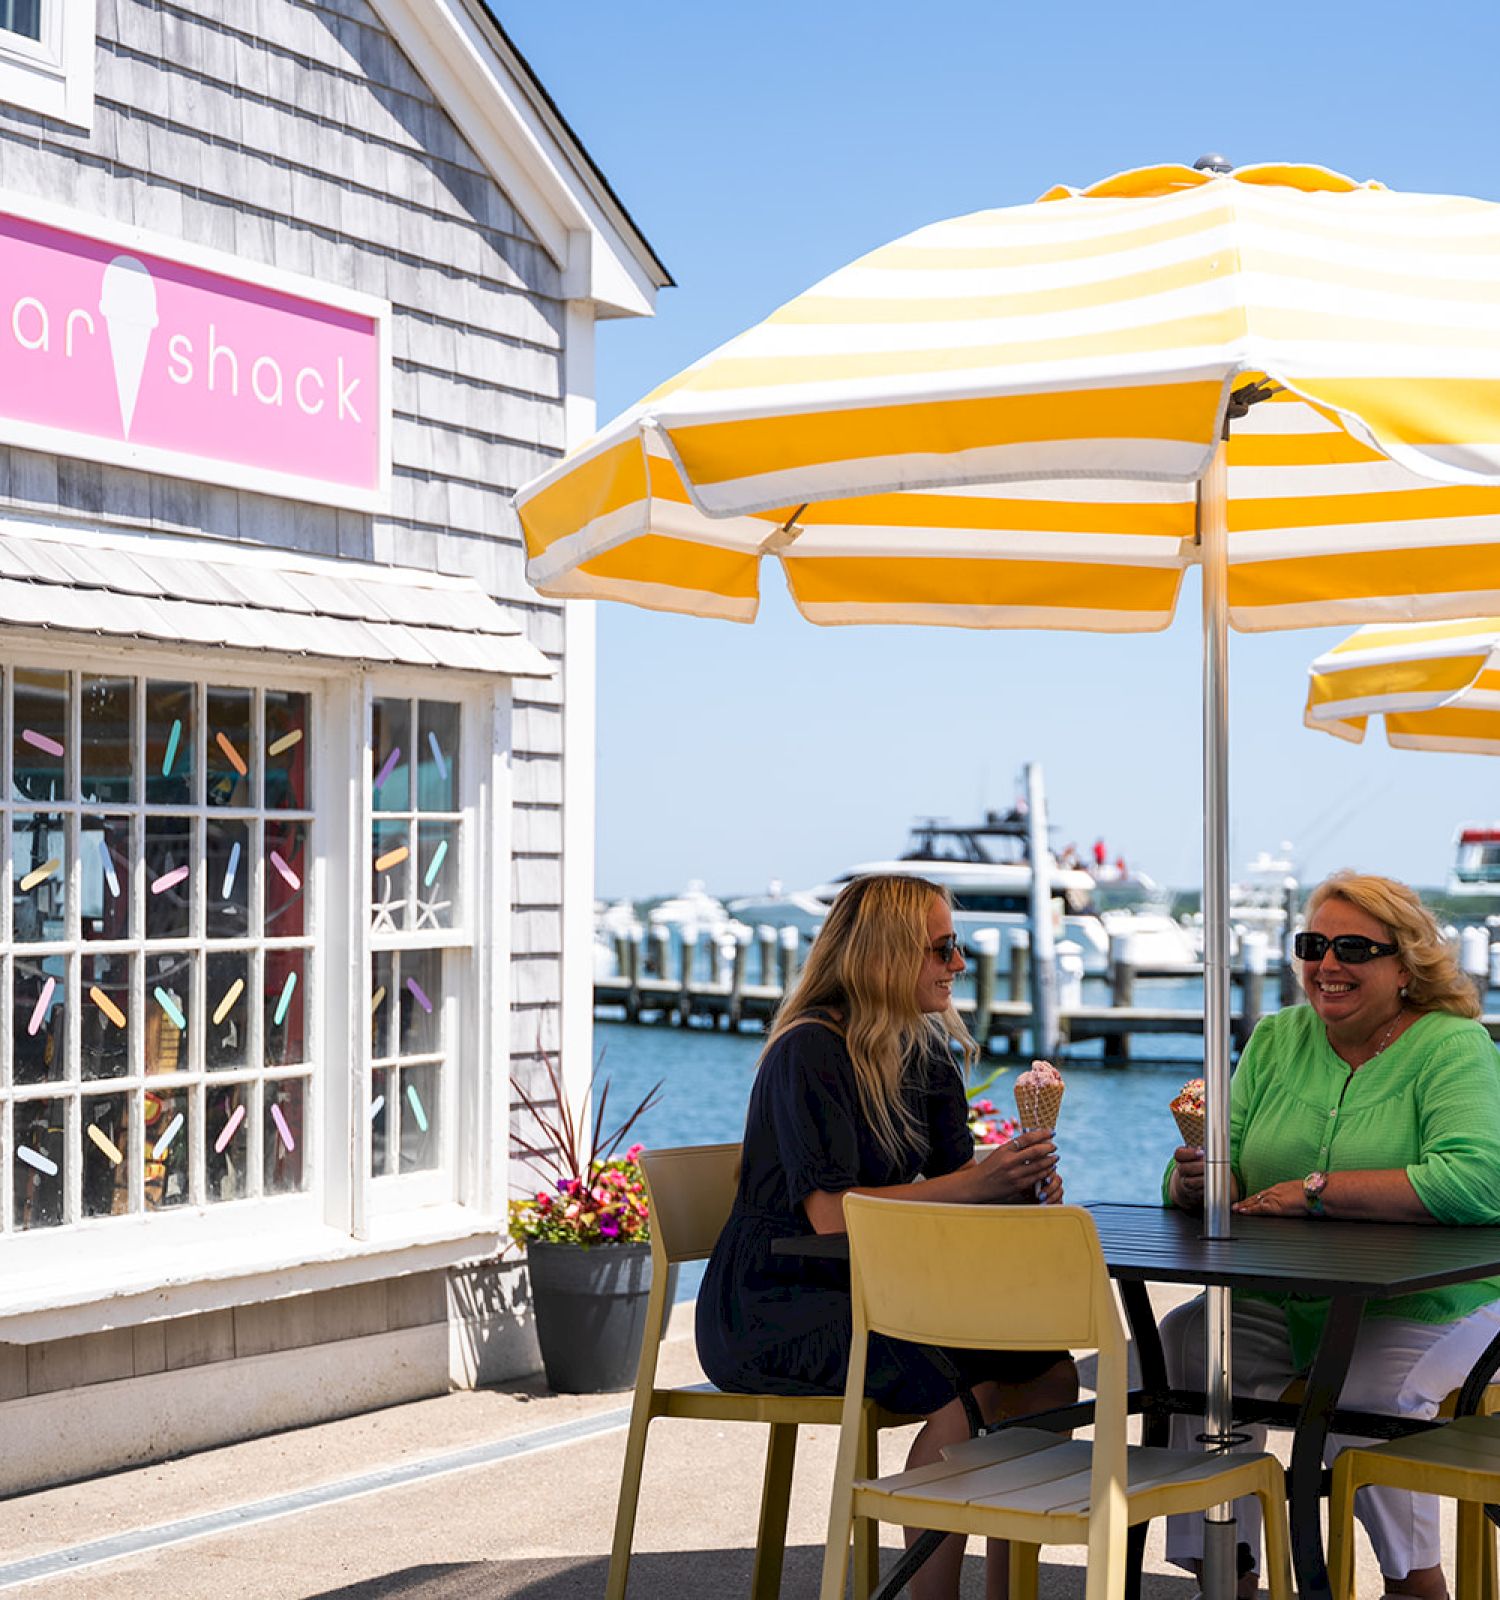 Two women are talking at an outdoor table under yellow and white umbrellas by a harbor, near a building that has a sign reading 